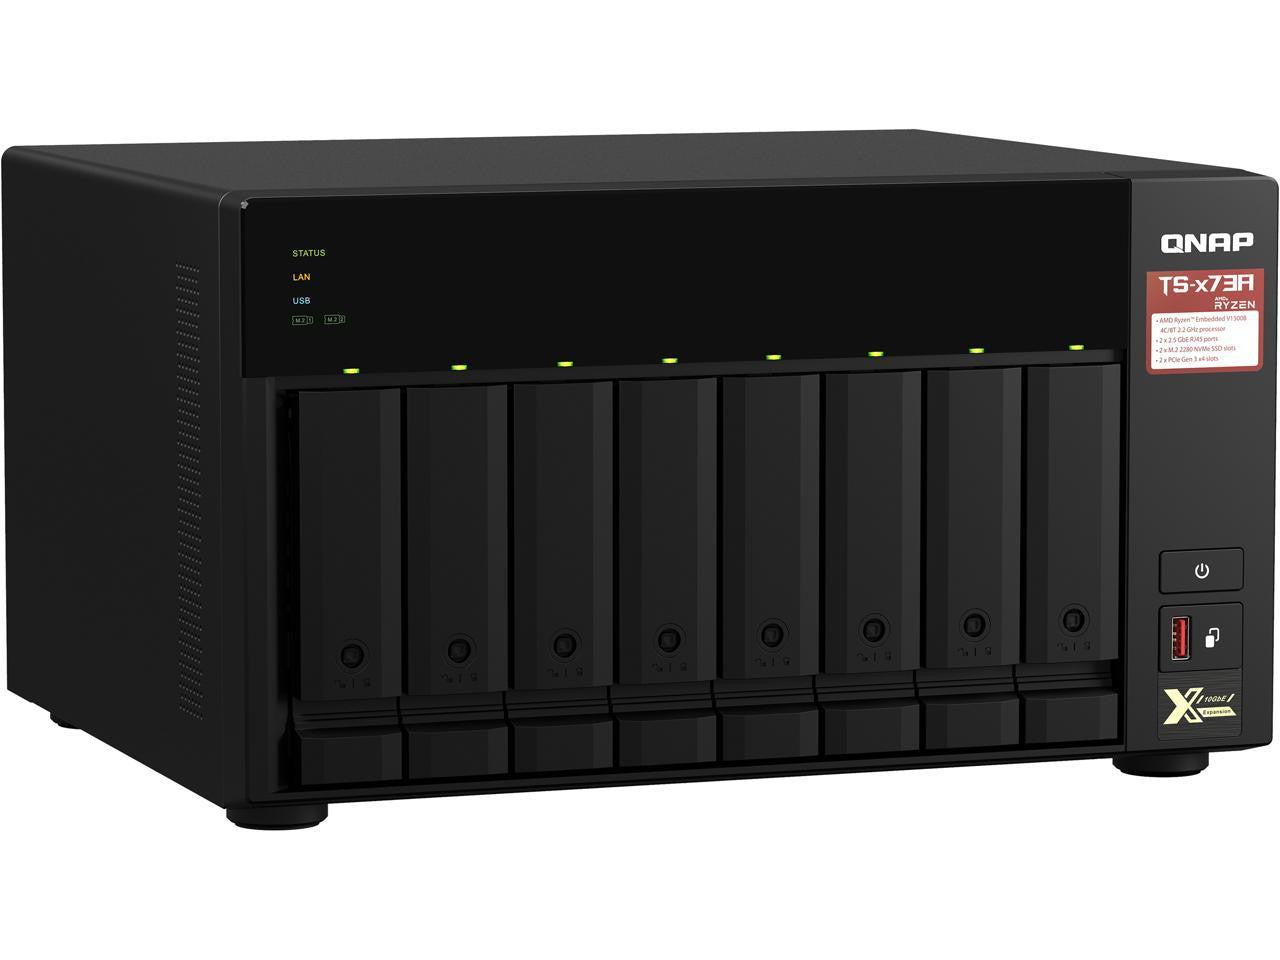 QNAP TS-873A 8-BAY NAS with 64GB DDR4 RAM and 64TB (8x8TB) Western Digital RED PLUS Drives Fully Assembled and Tested